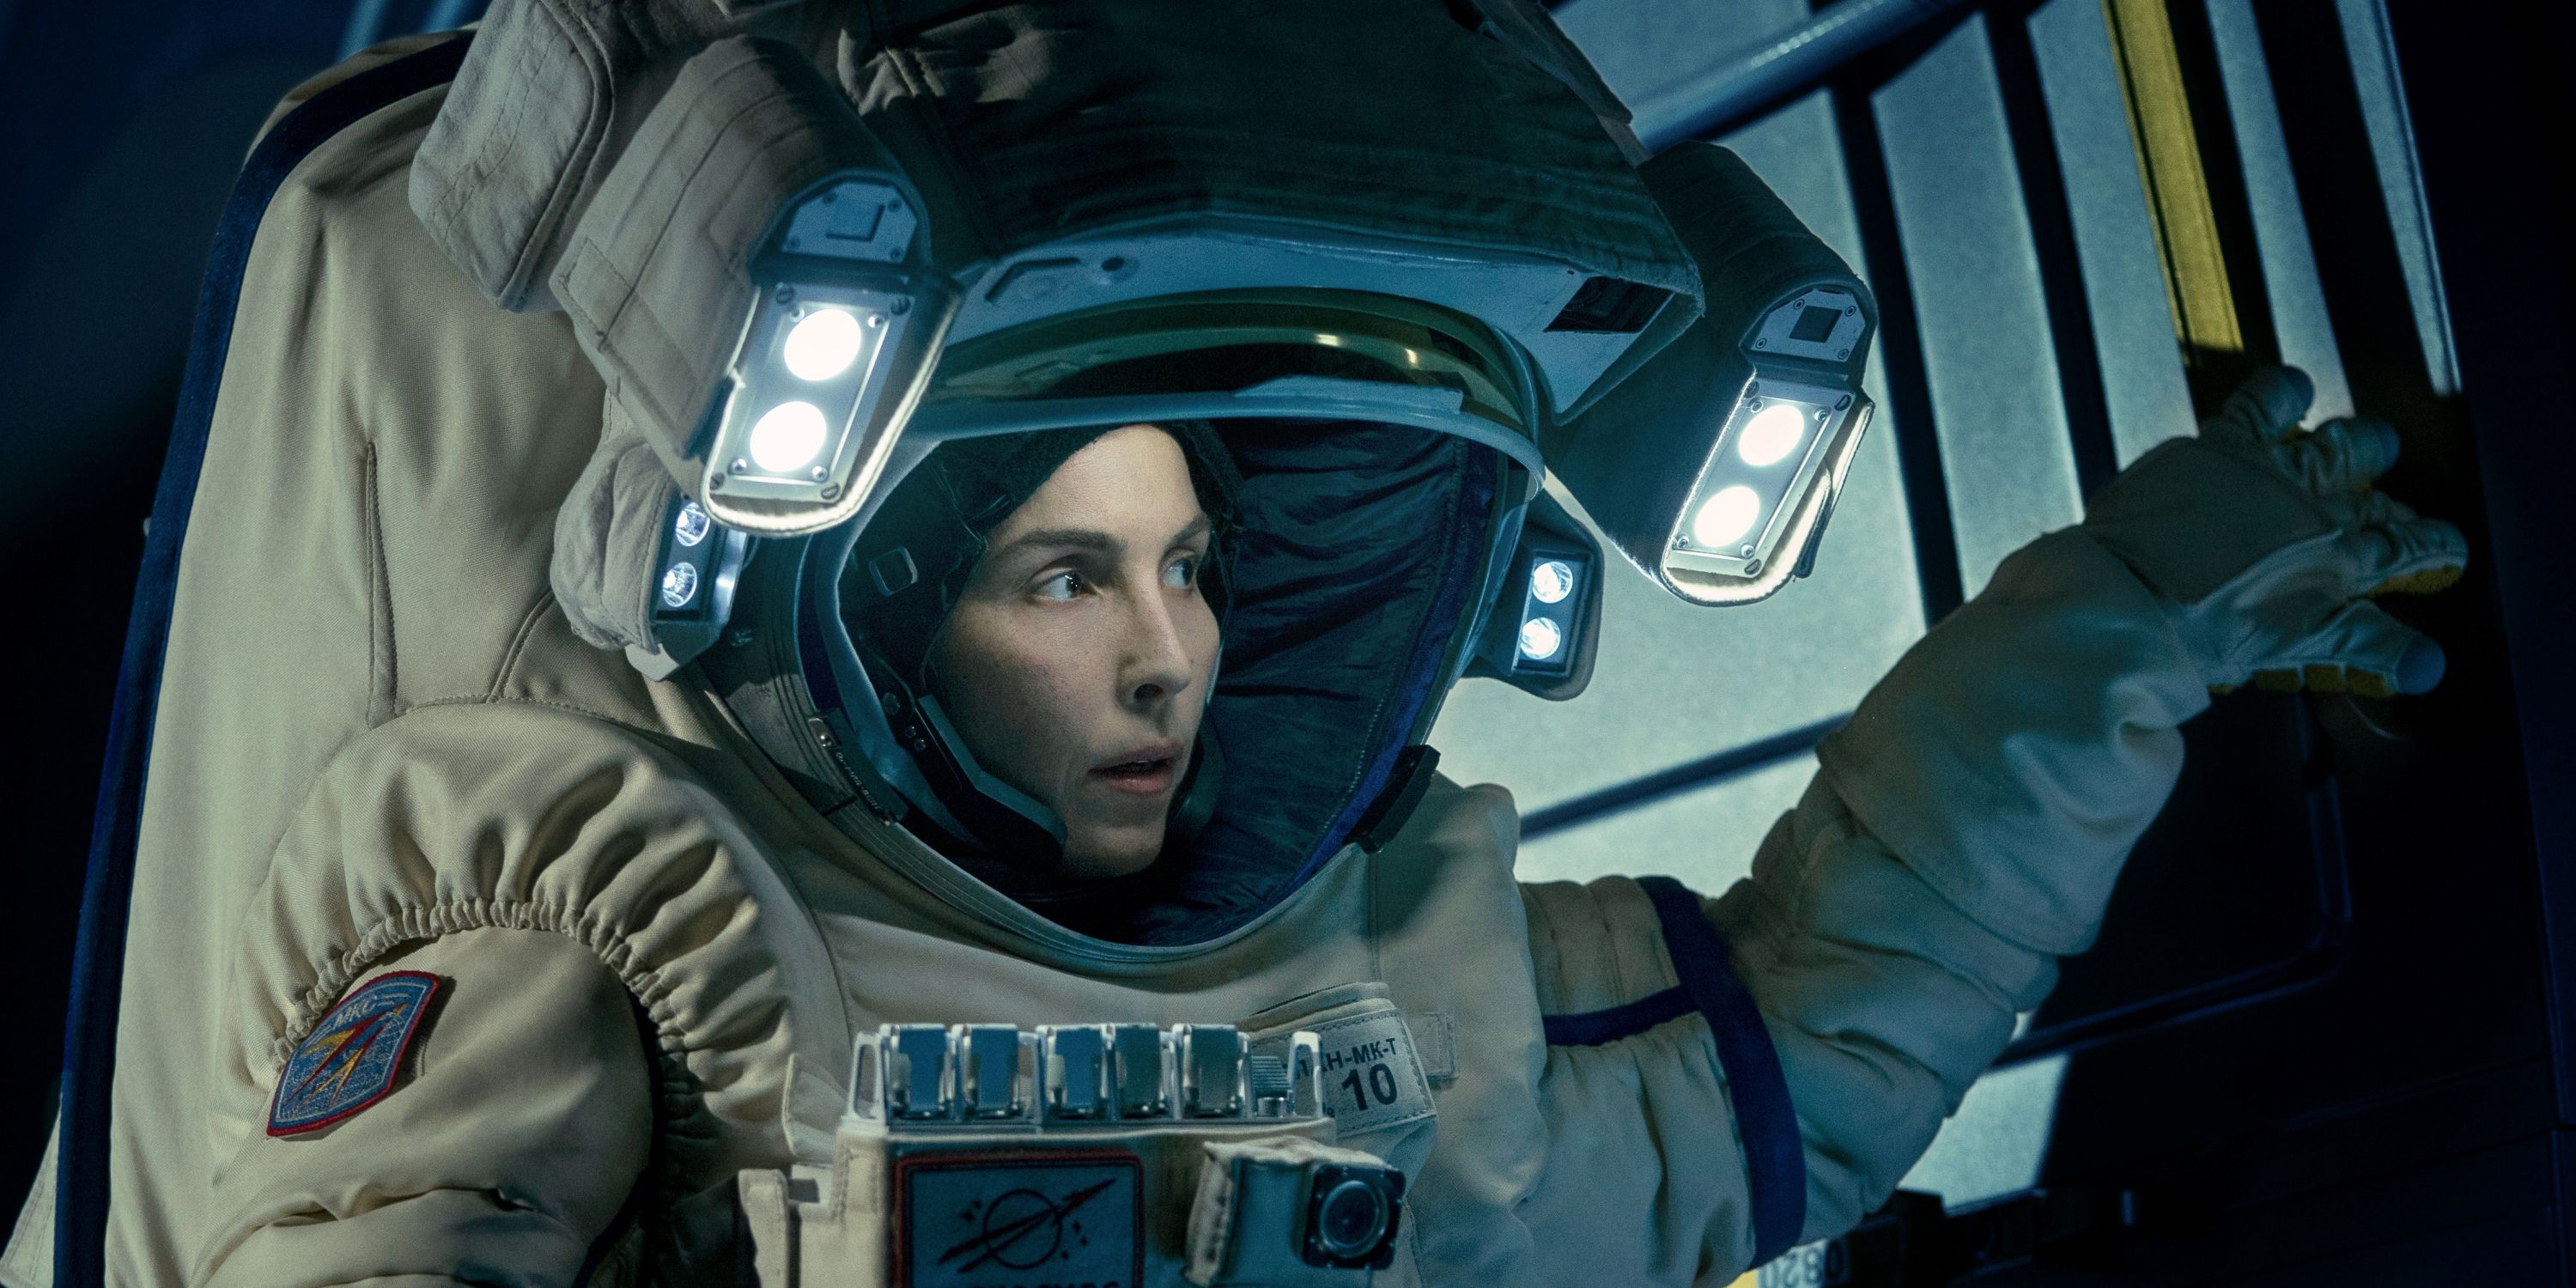 Noomi Rapace as Jo Ericsson in a space suit looking around suspiciously in Constellation